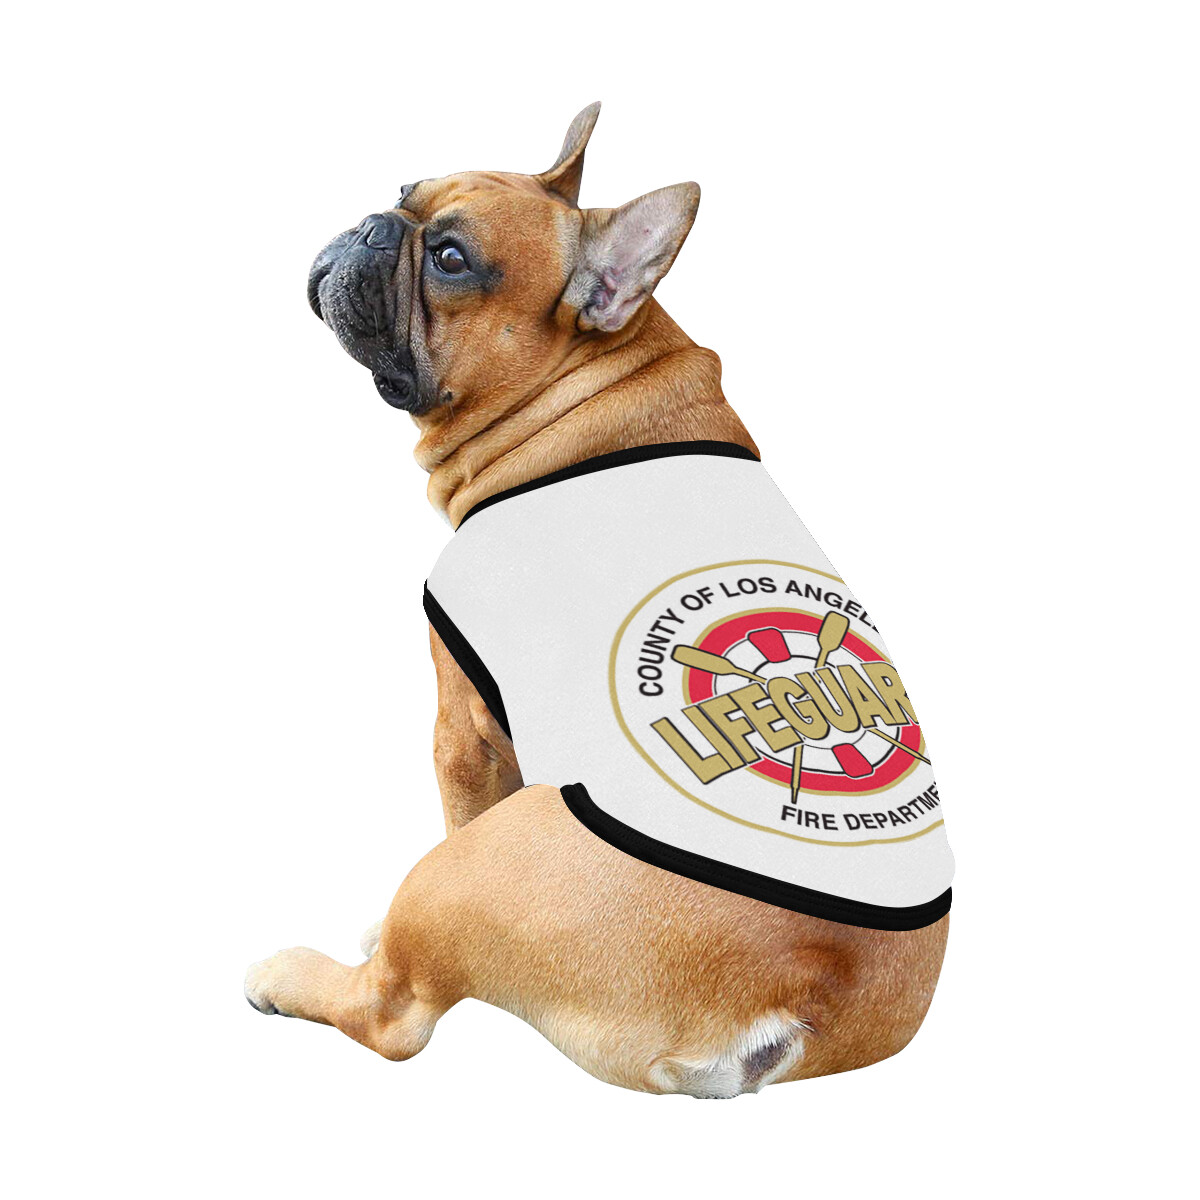 🐕 Lifeguard LAFD Los Angeles Fire Department Dog shirt, Dog Tank Top, Dog t-shirt, Dog clothes, Gifts, 7 sizes XS to 3XL, dog gifts